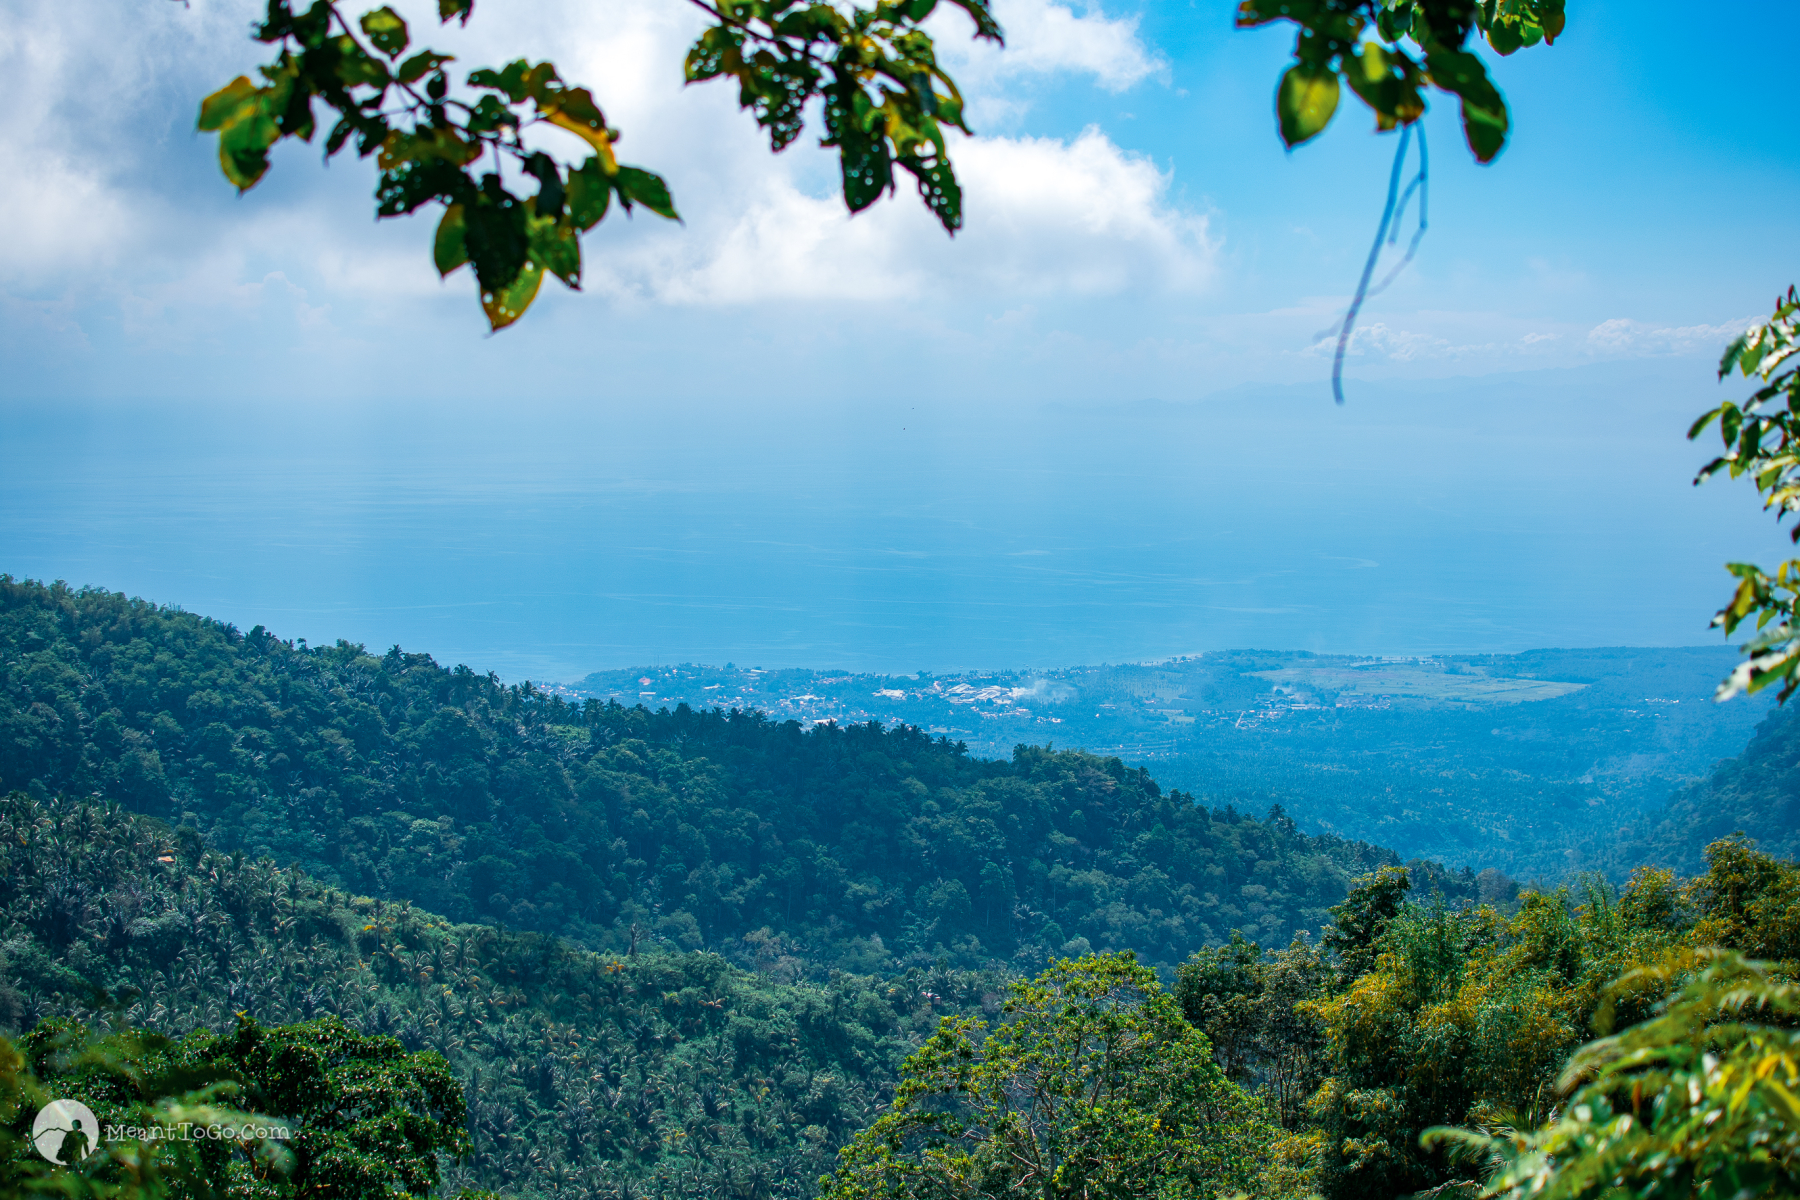 Panoramic view of the municipality of Santa Cruz as seen from Mount Dinor